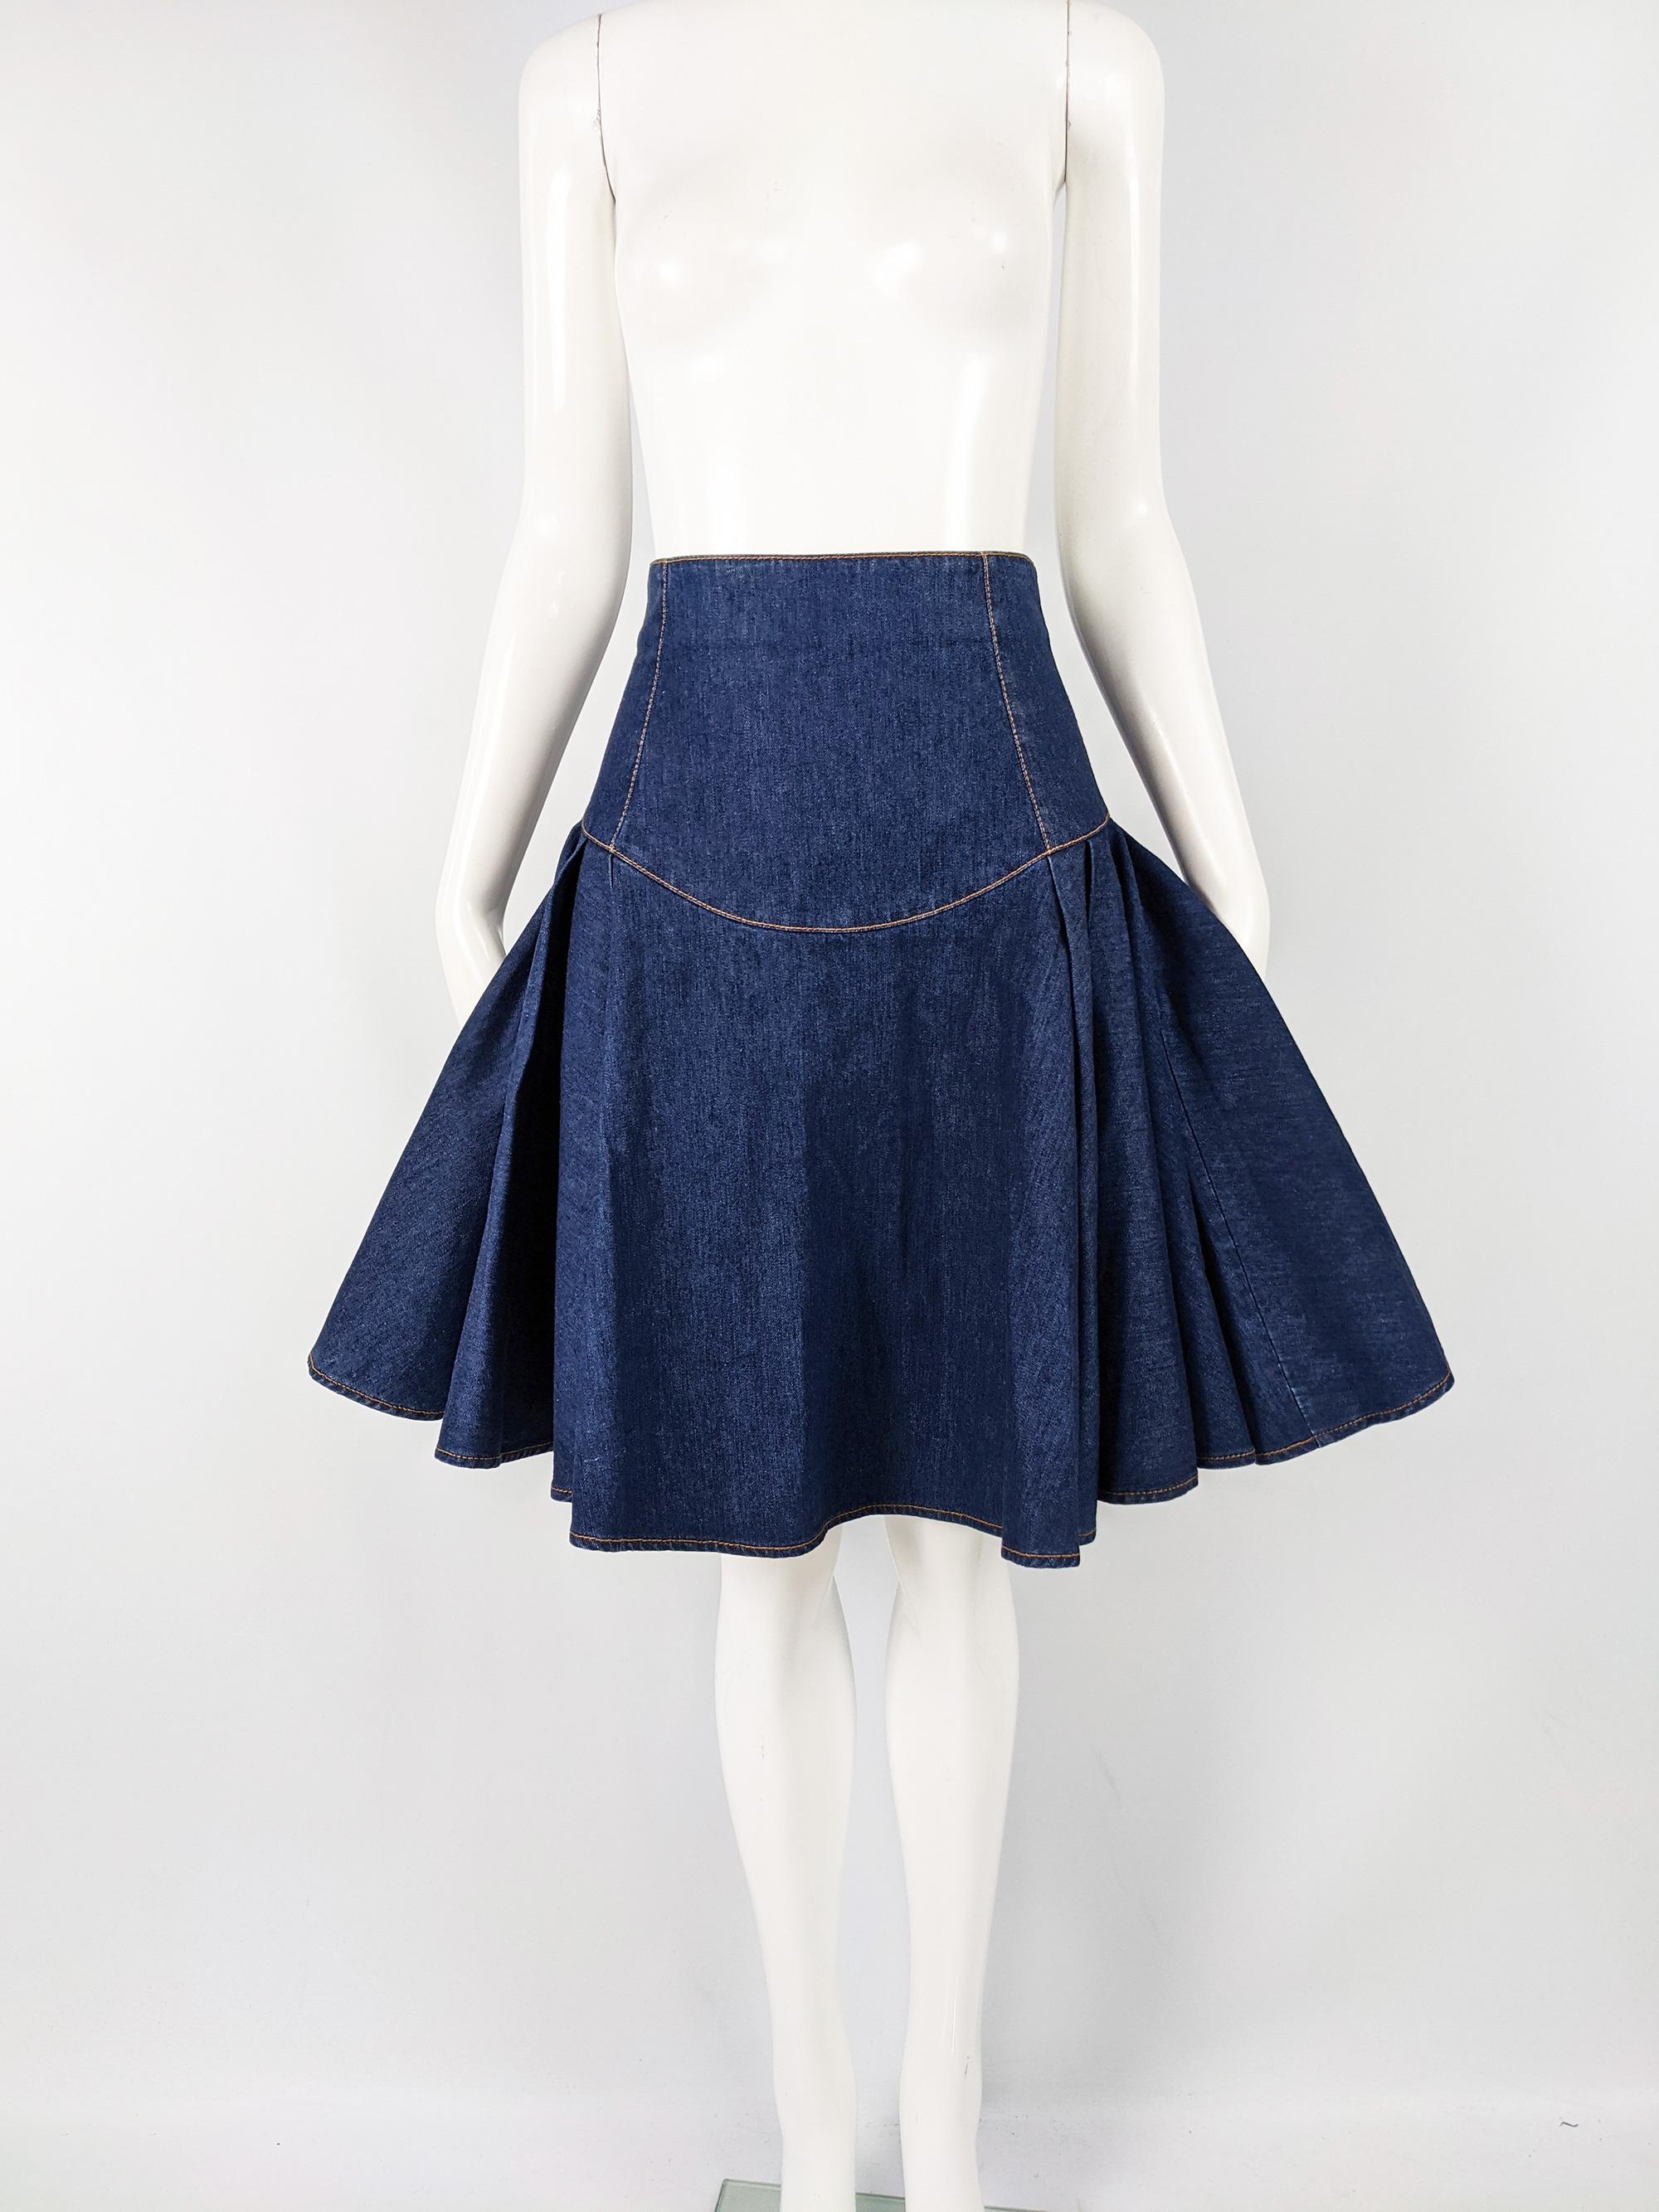 An incredible vintage Alexander McQueen skirt from the Pre-Spring Summer 2011 collection. In a blue denim with a high waist and yard of fabric gathered at the sides and the back for a flattering, high fashion silhouette. 

Size: Marked IT 38 which